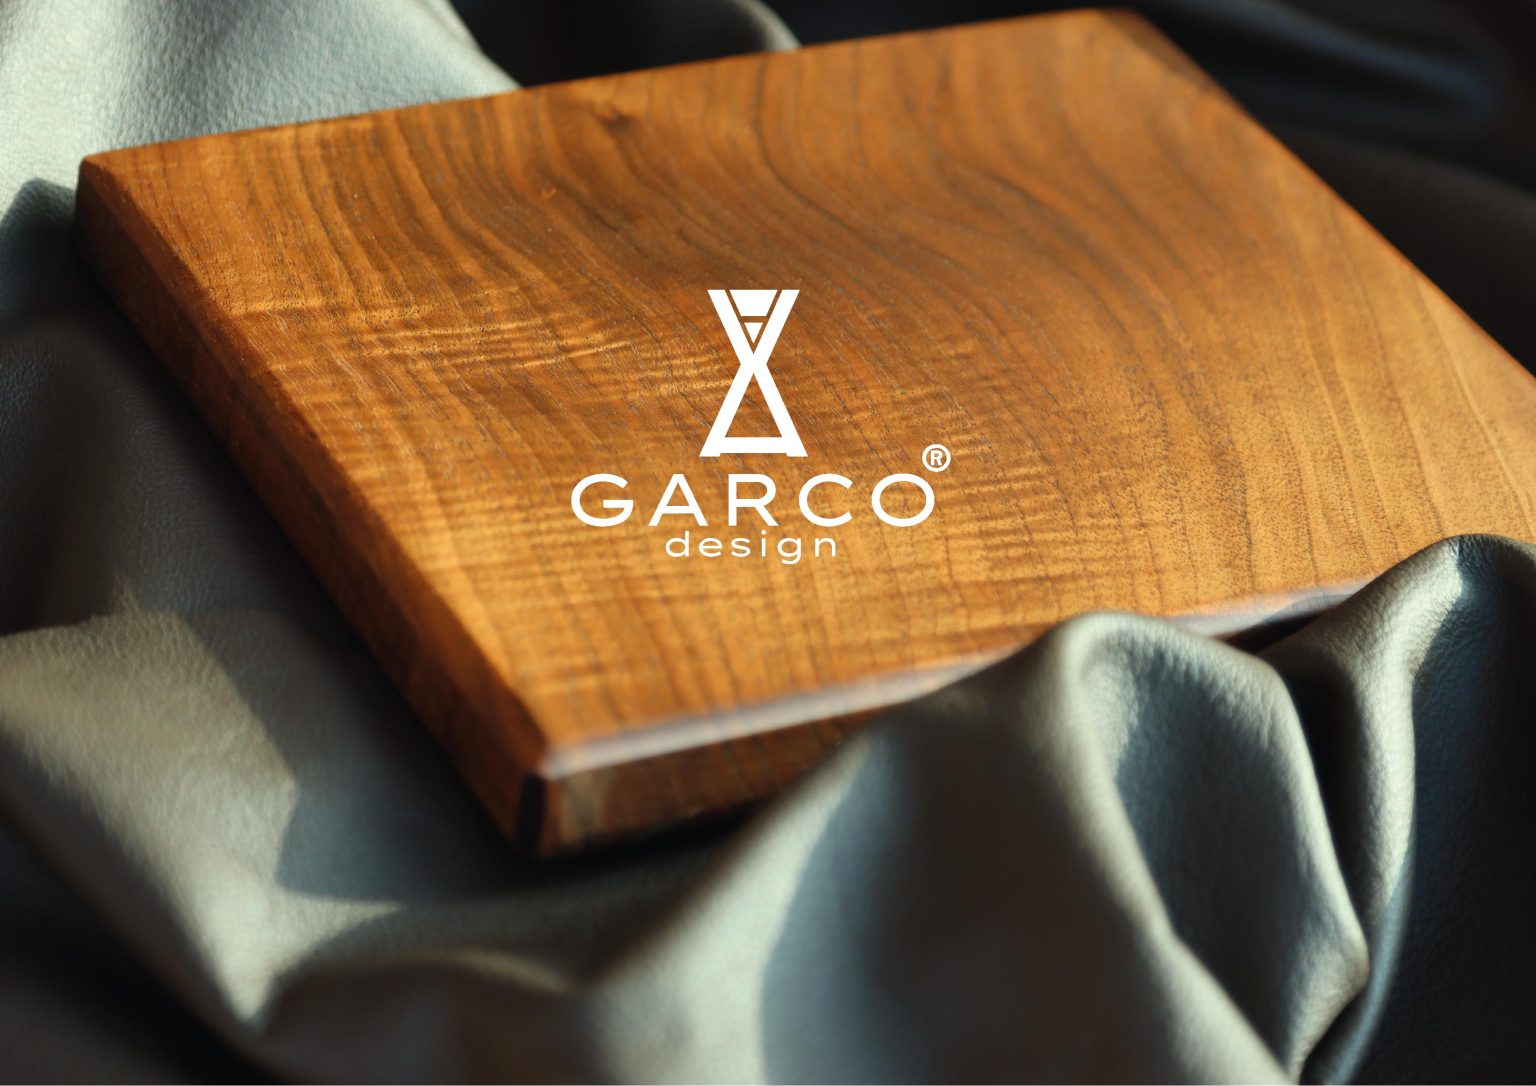 design and materials by garco design